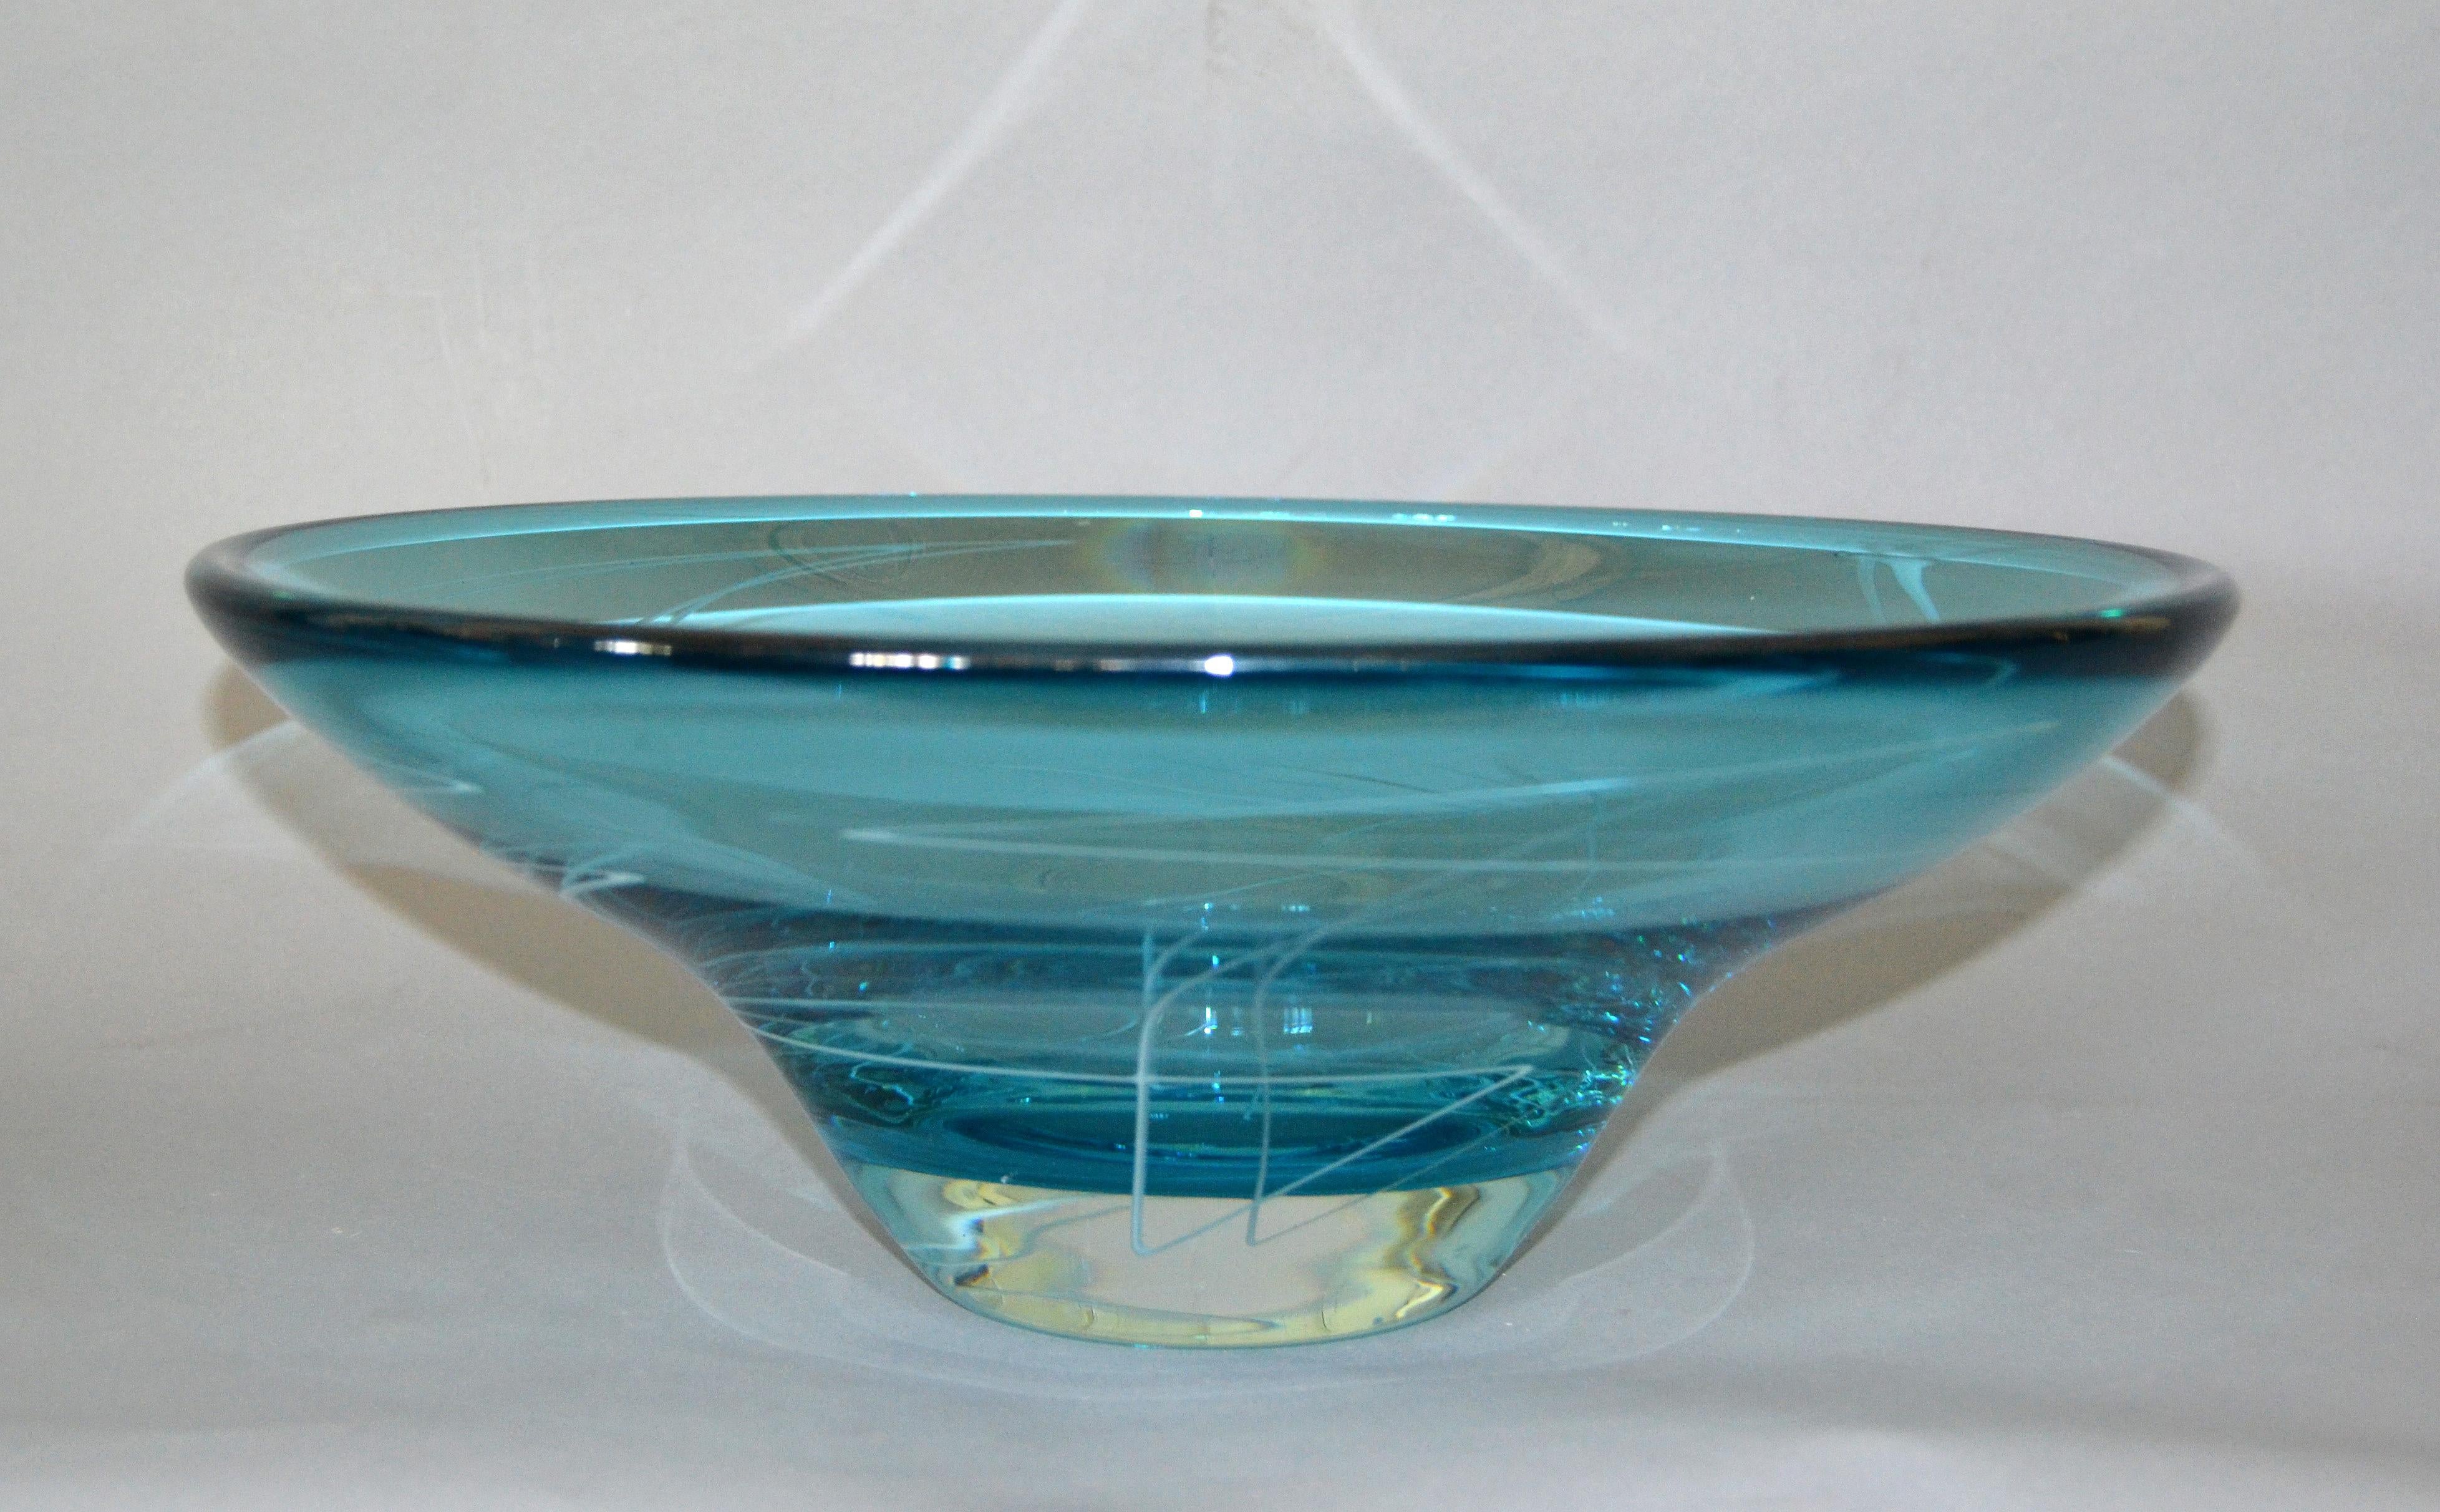 A stunning contemporary art glass centerpiece or fruit bowl by Mark J. Sudduth.
Rich blue coloring at the top fades to clear at the bottom.
Floating geometric lines are layered in the bowl.
Signed Mark J. Sudduth.